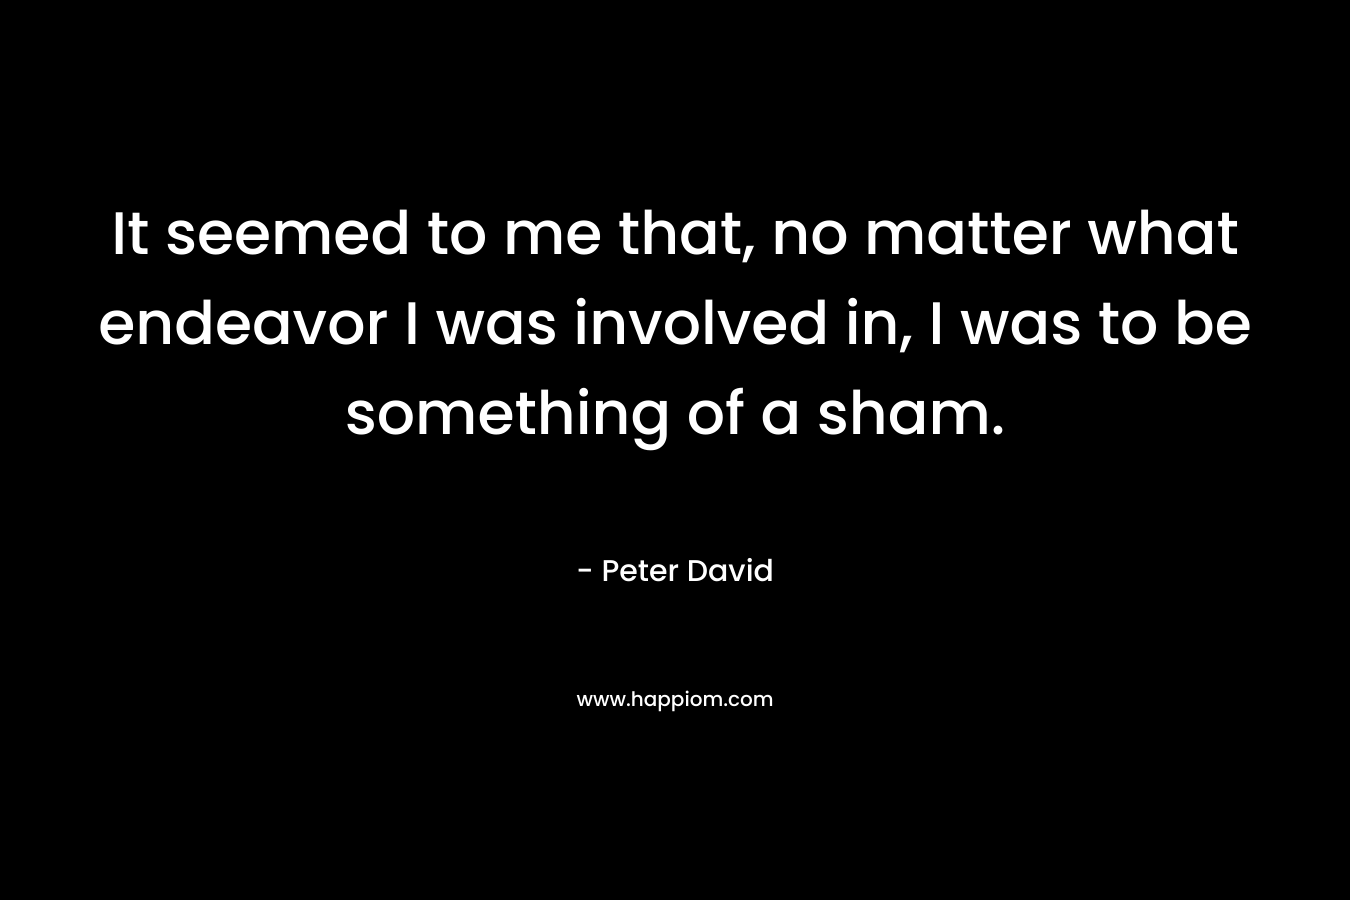 It seemed to me that, no matter what endeavor I was involved in, I was to be something of a sham. – Peter David